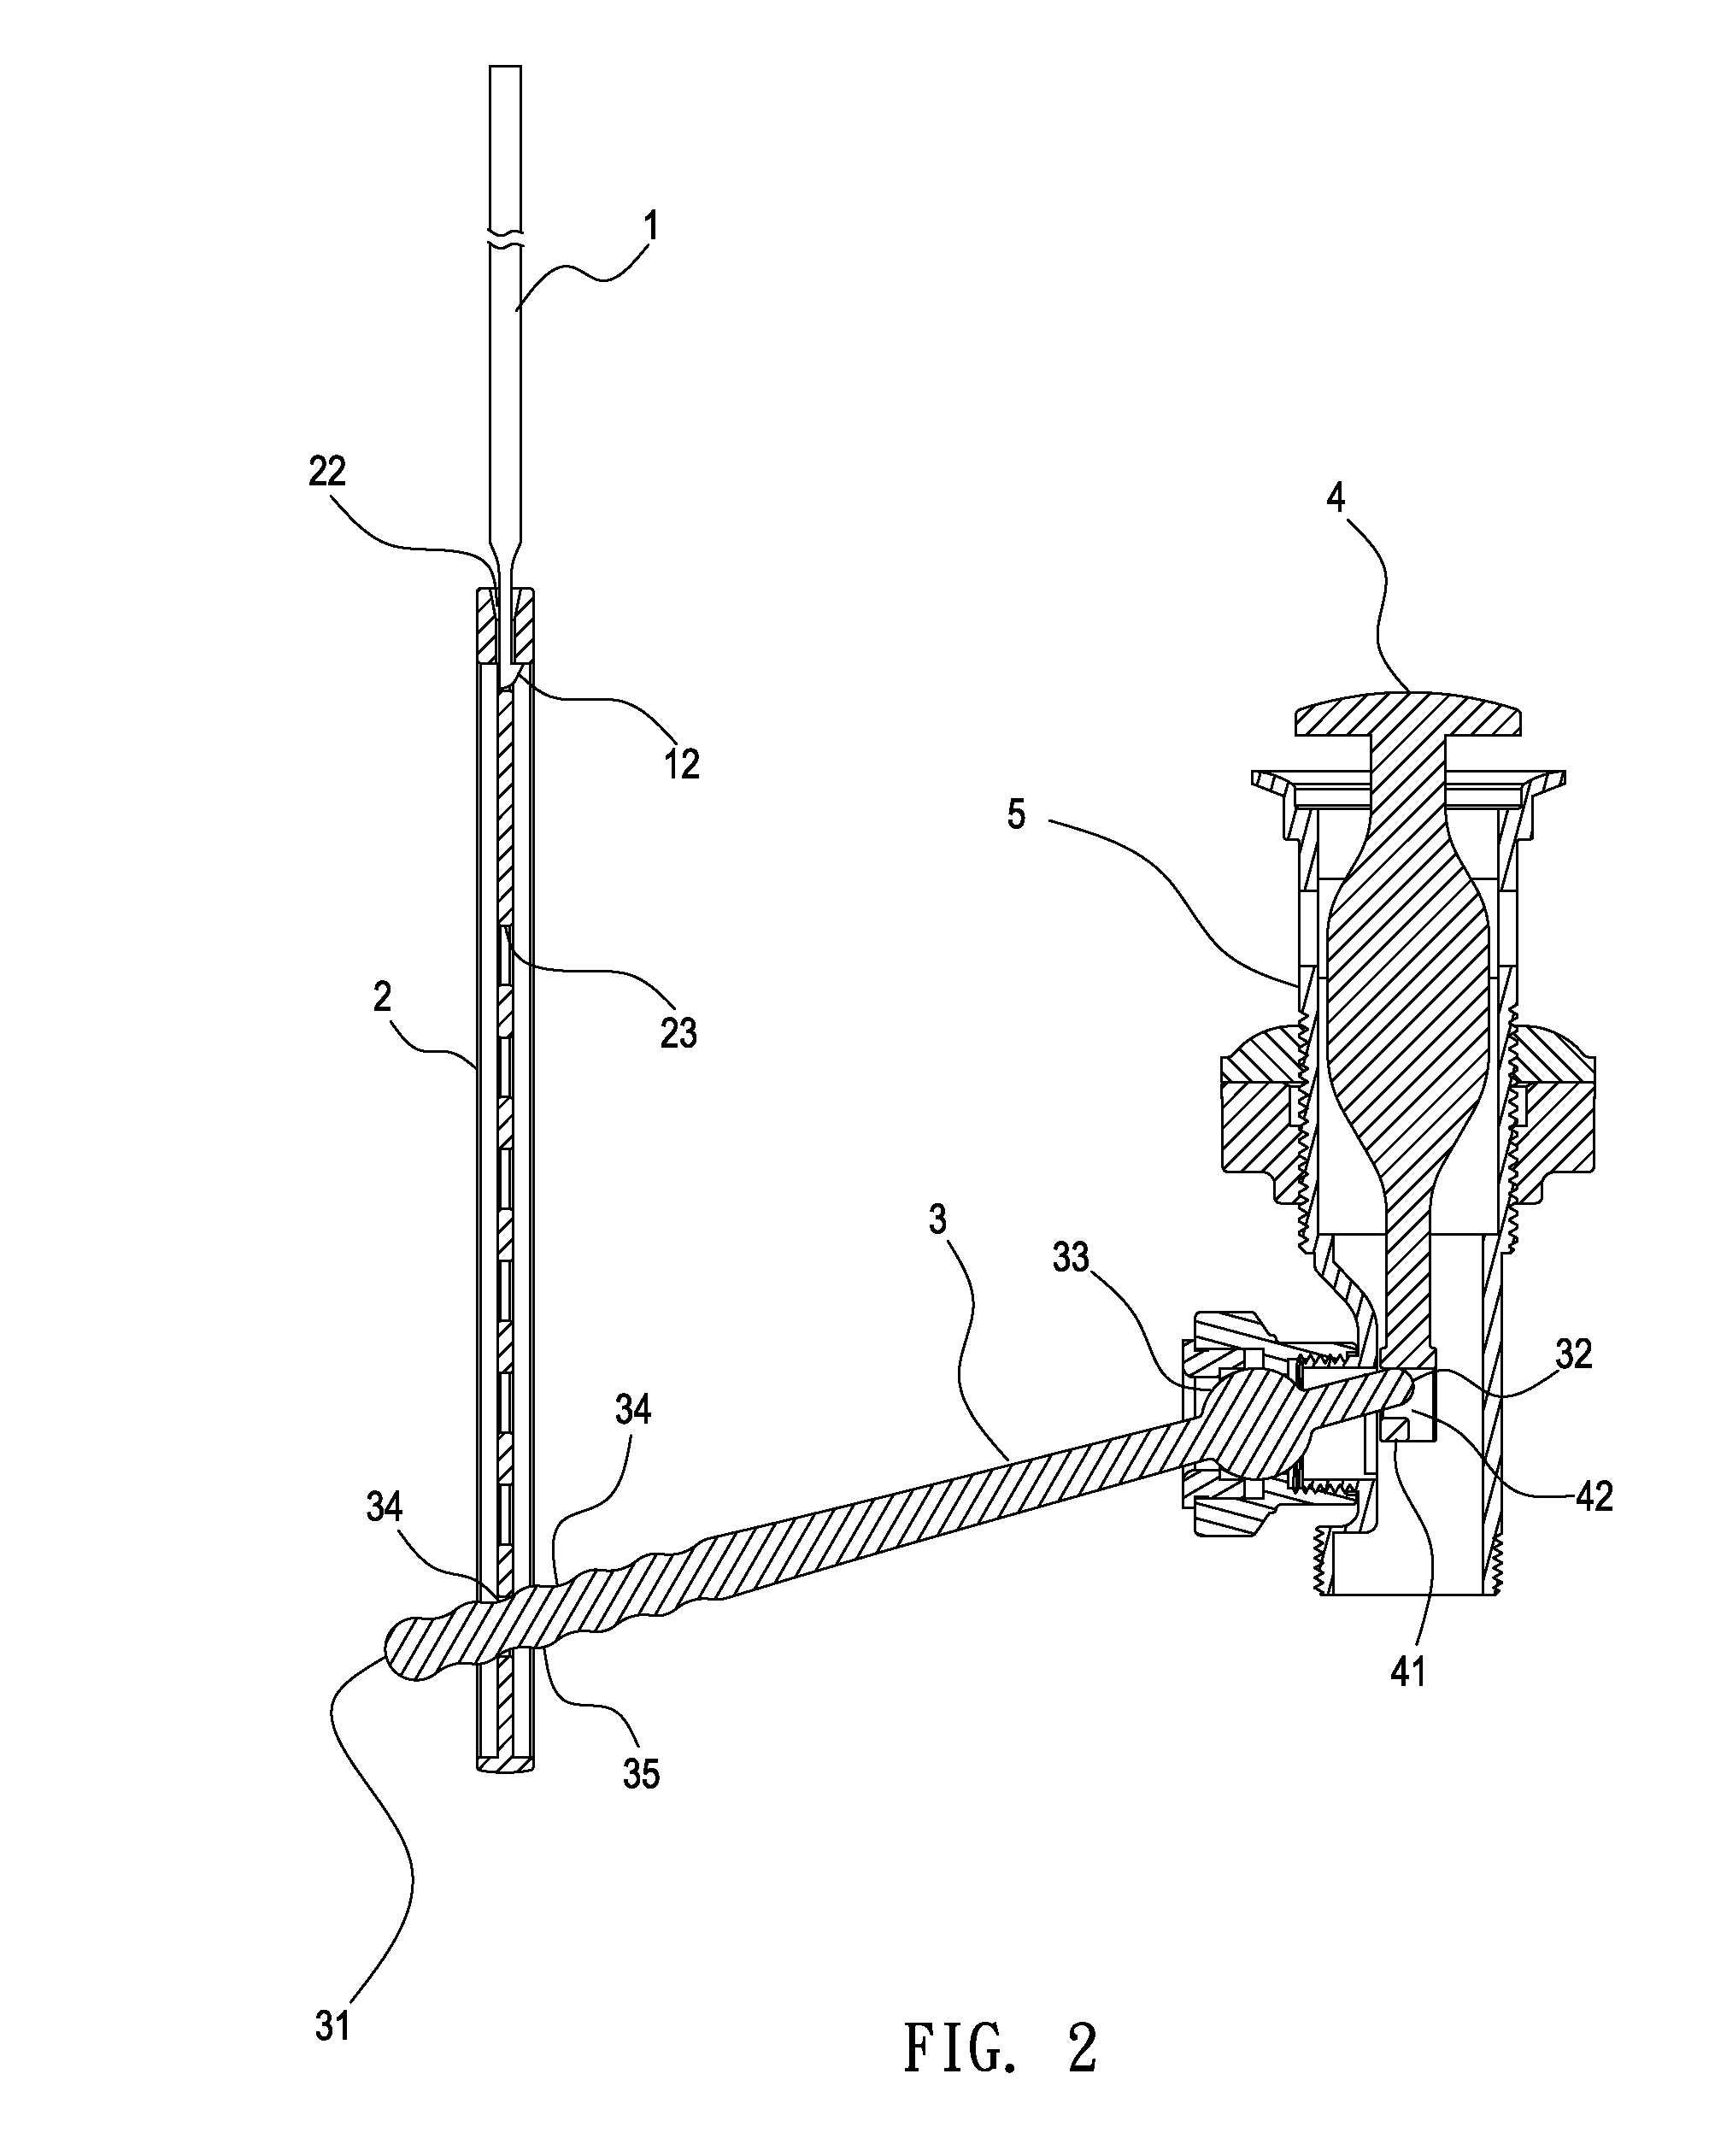 Pop-up drain stopper linkage assembly